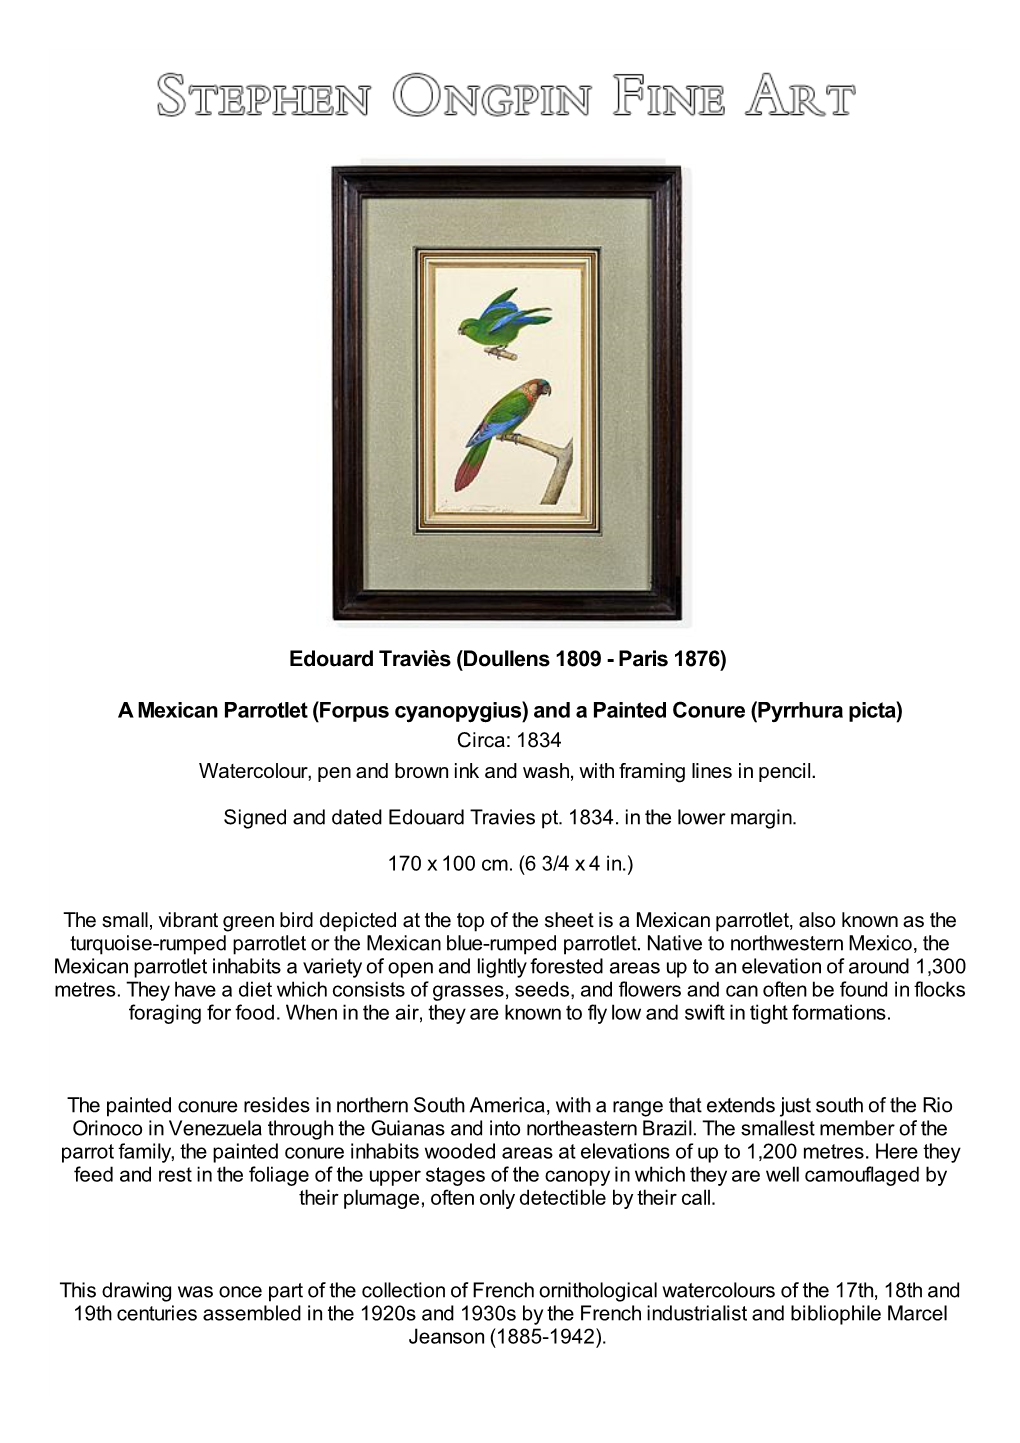 A Mexican Parrotlet (Forpus Cyanopygius) and a Painted Conure (Pyrrhura Picta) Circa: 1834 Watercolour, Pen and Brown Ink and Wash, with Framing Lines in Pencil